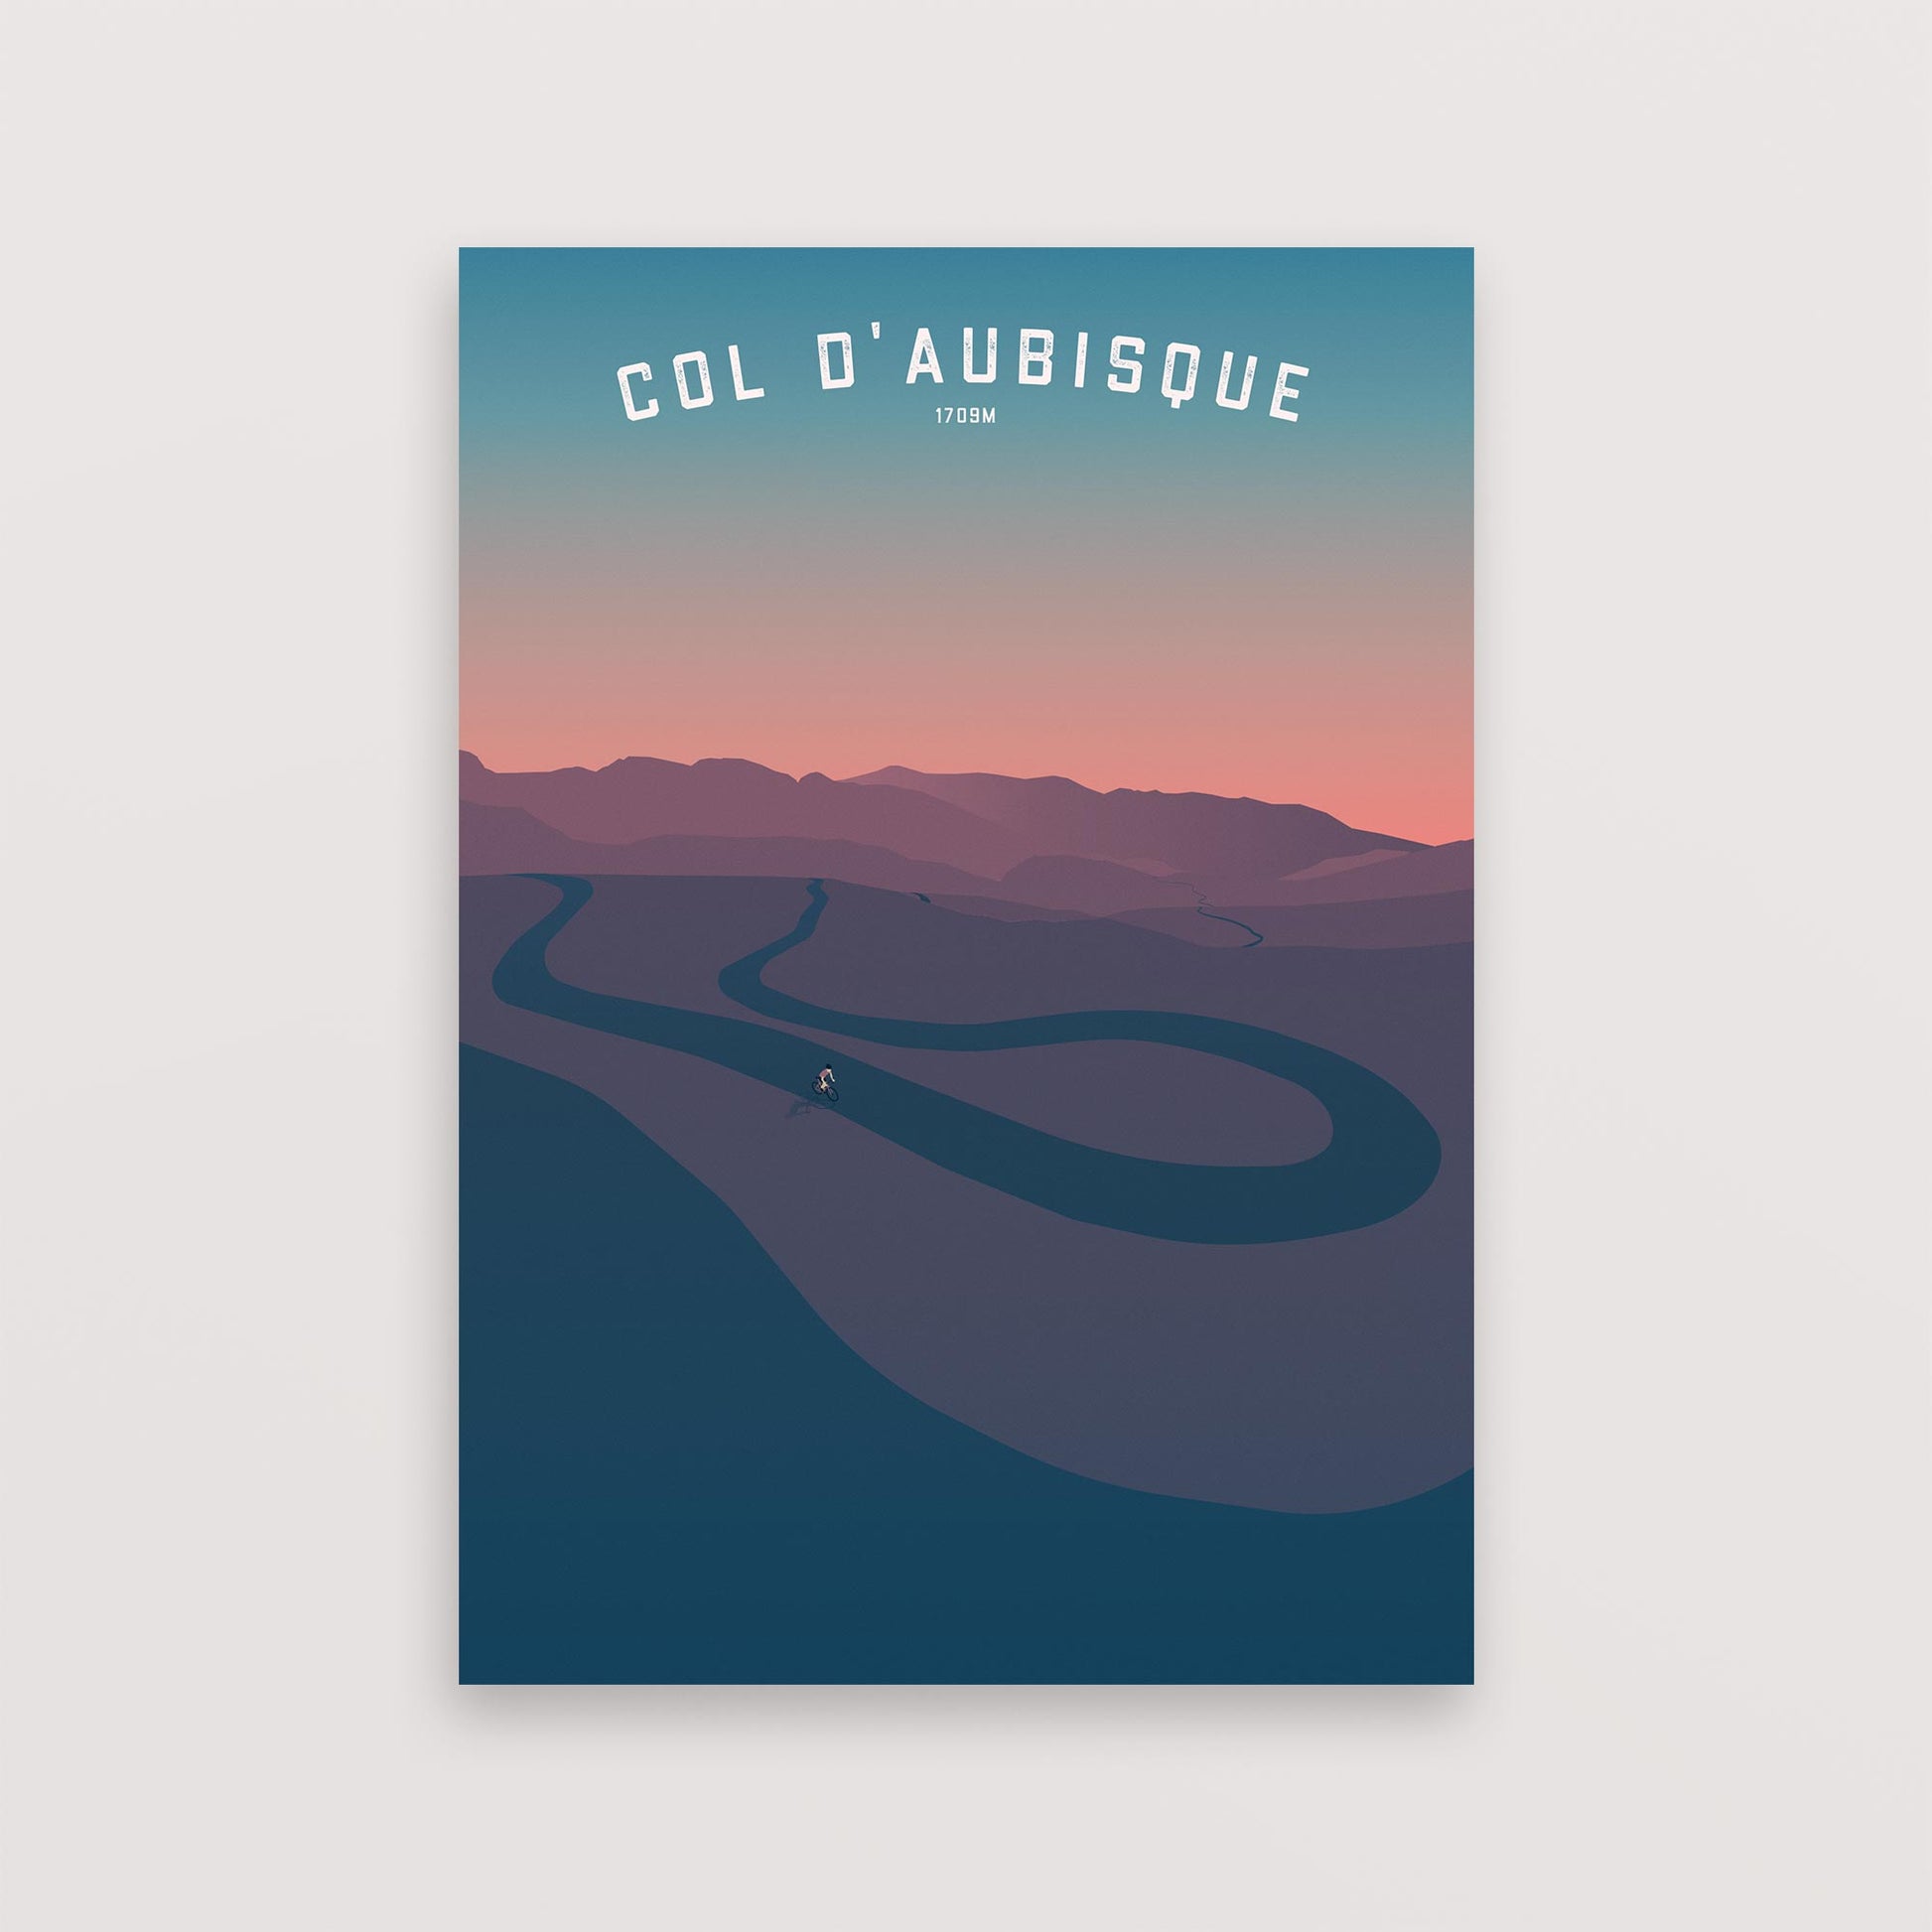 Col d'Aubisque – Poster – The English Cyclist